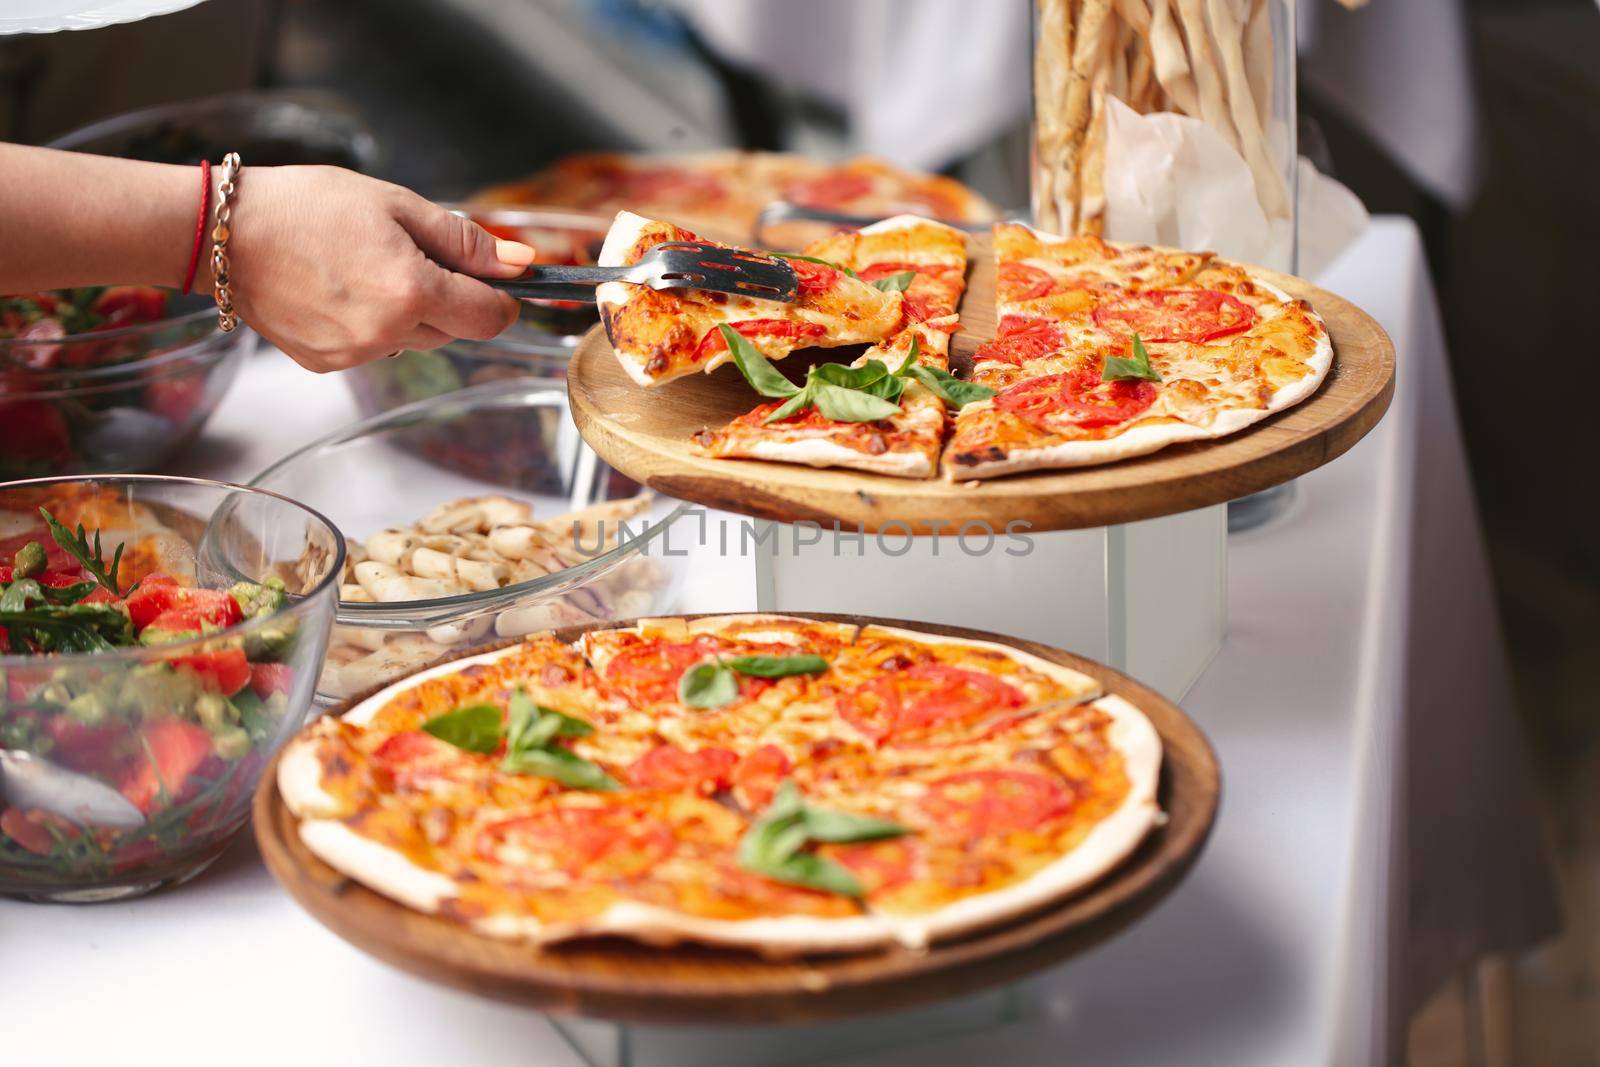 Self-service at the buffet. A variety of pizza and salads by StudioPeace